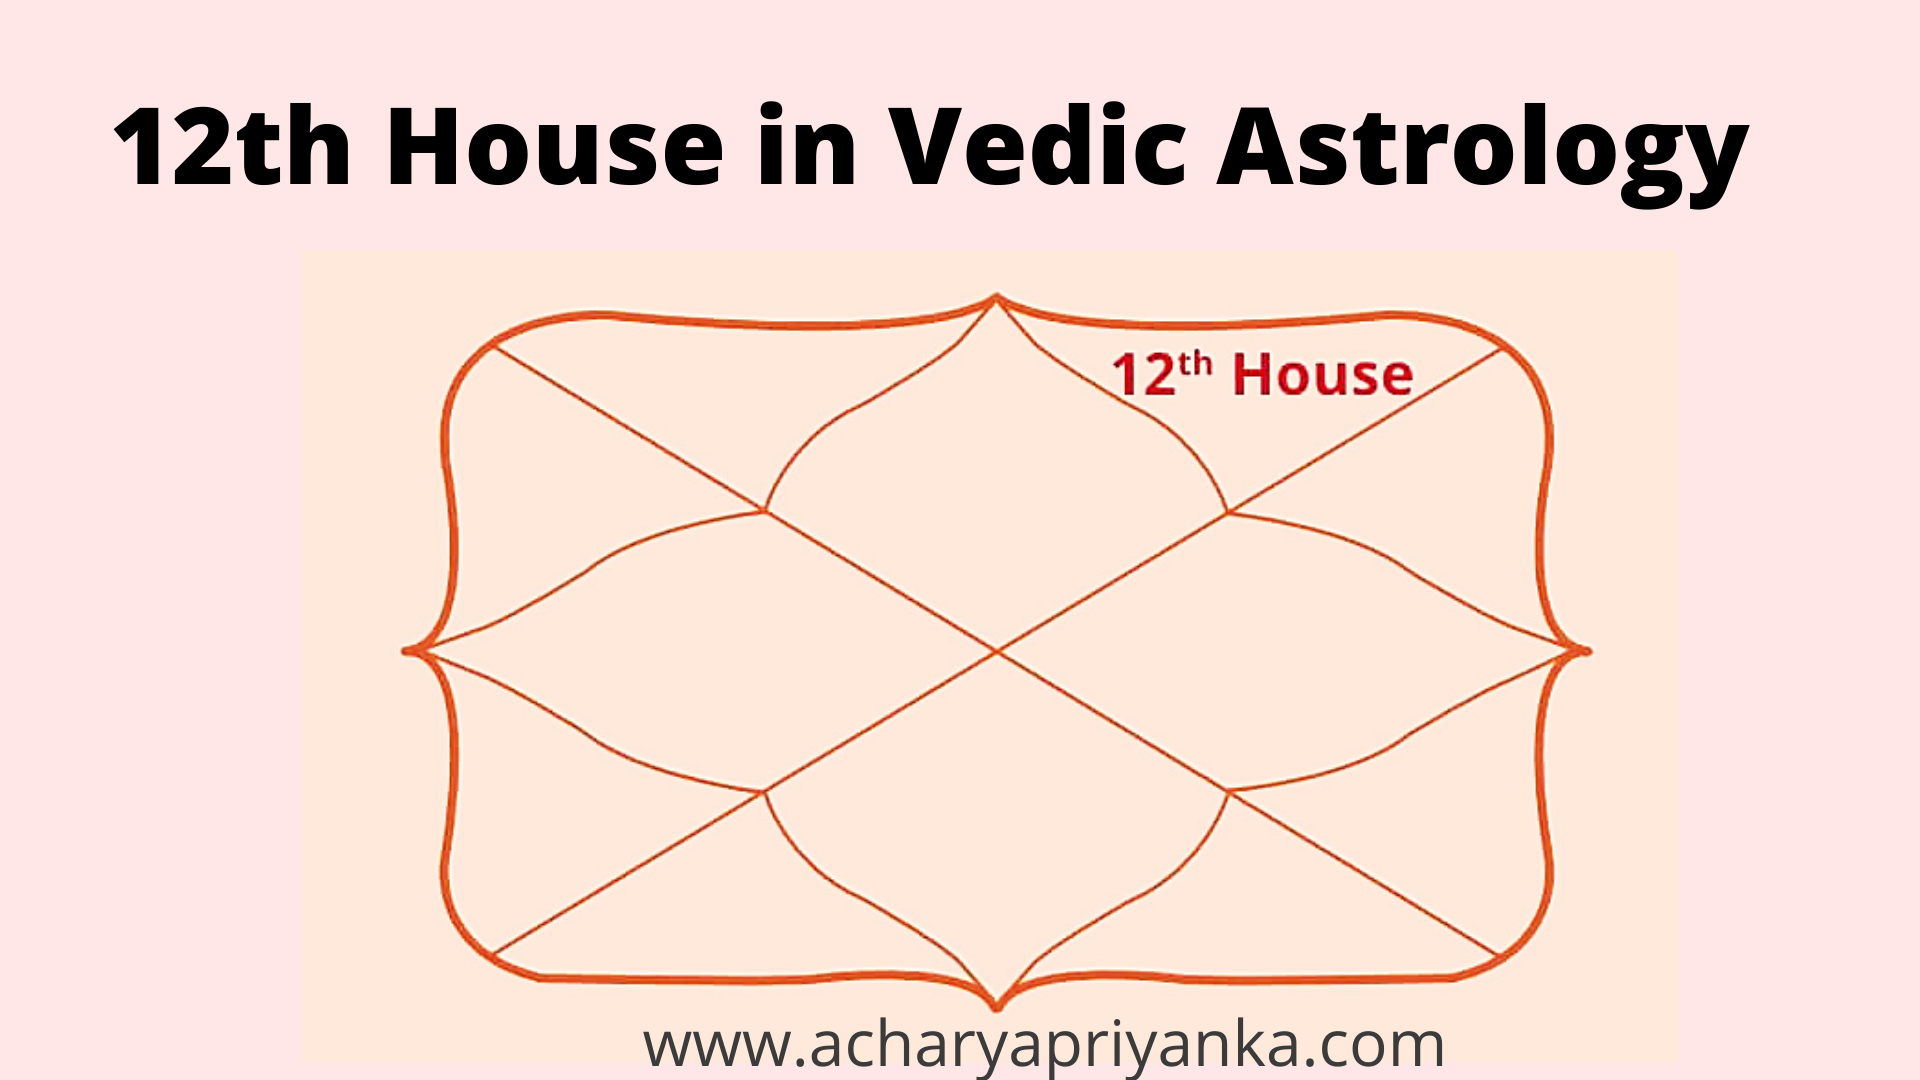 12th house meaning in vedic astrology